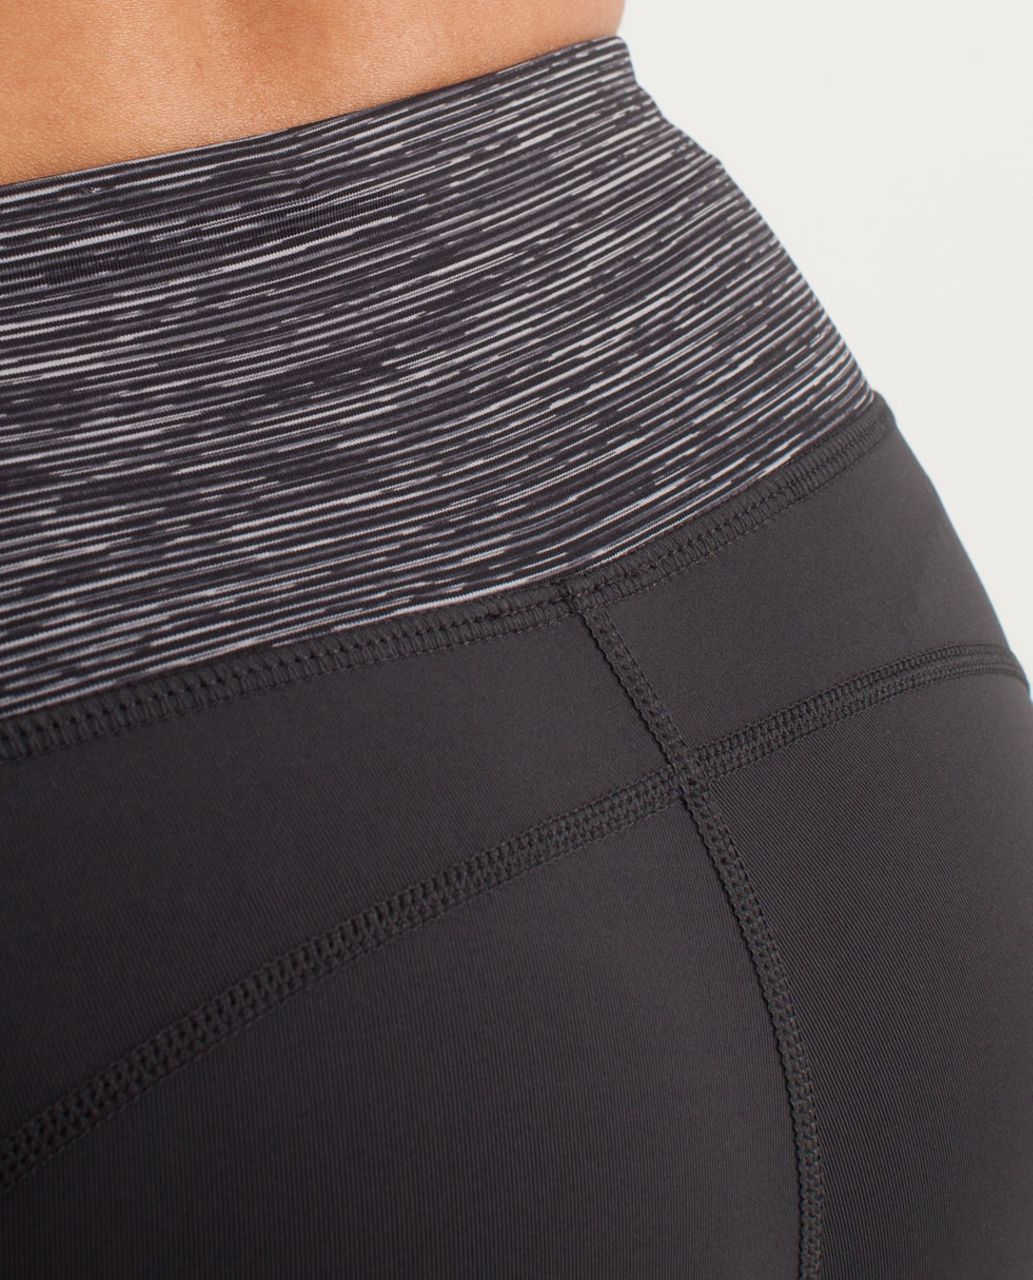 Lululemon Run:  In The Sun Crop - Deep Coal /  Wee Are From Space Black Combo